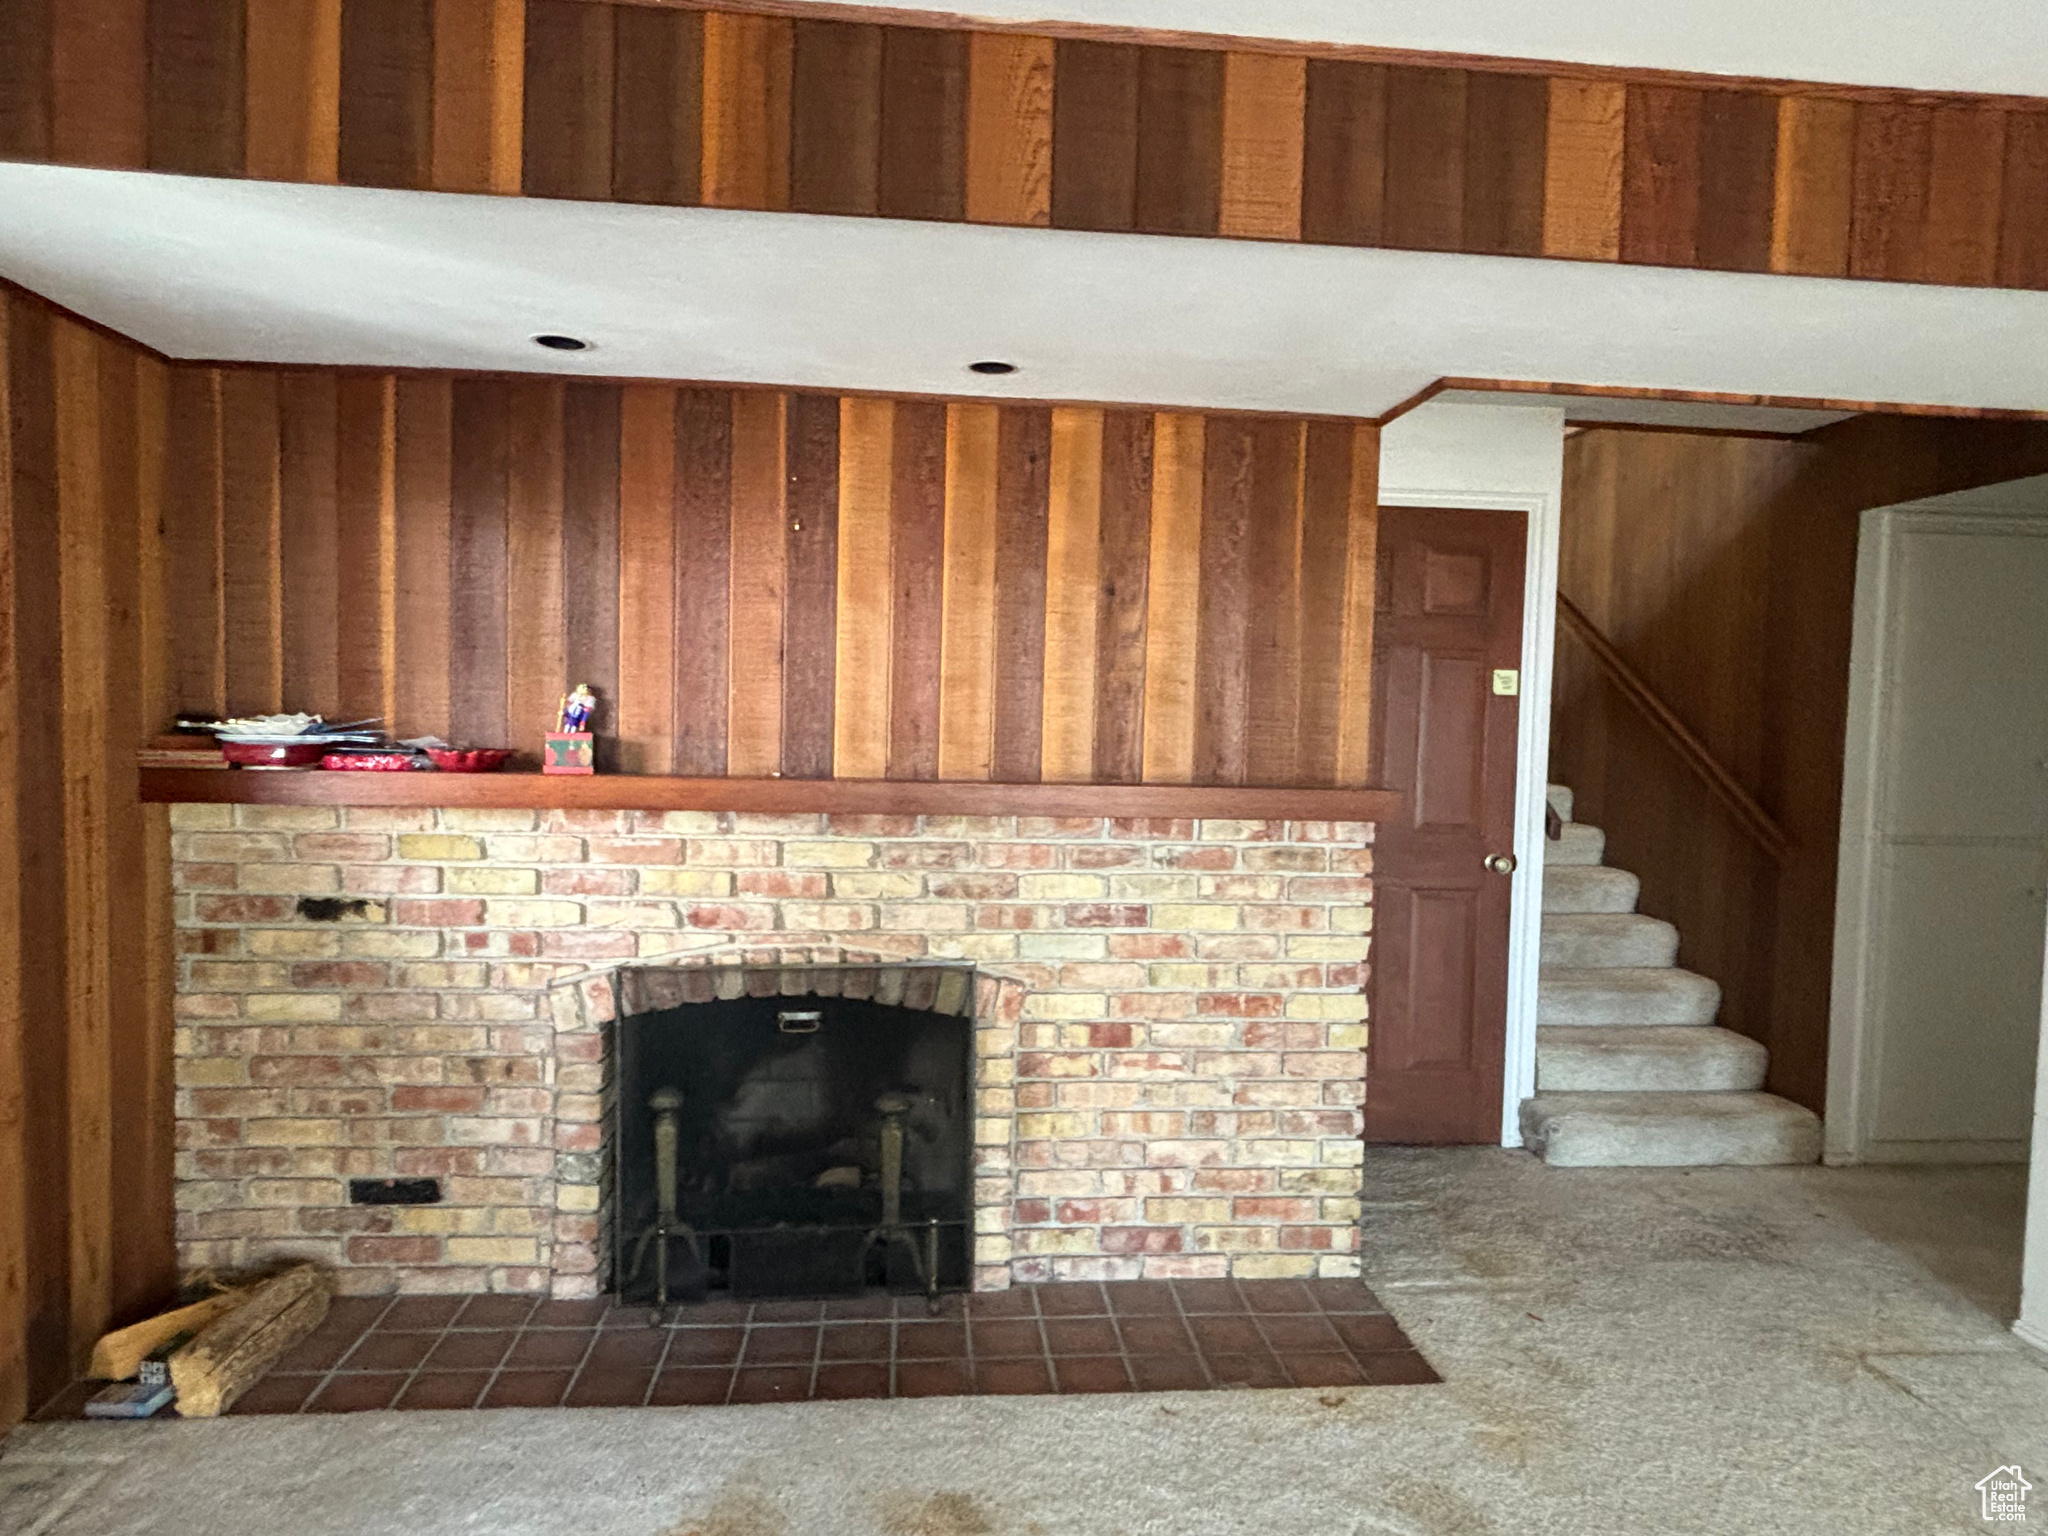 BEAUTIFUL FIREPLACE IN BASEMENT FAMILY ROOM!